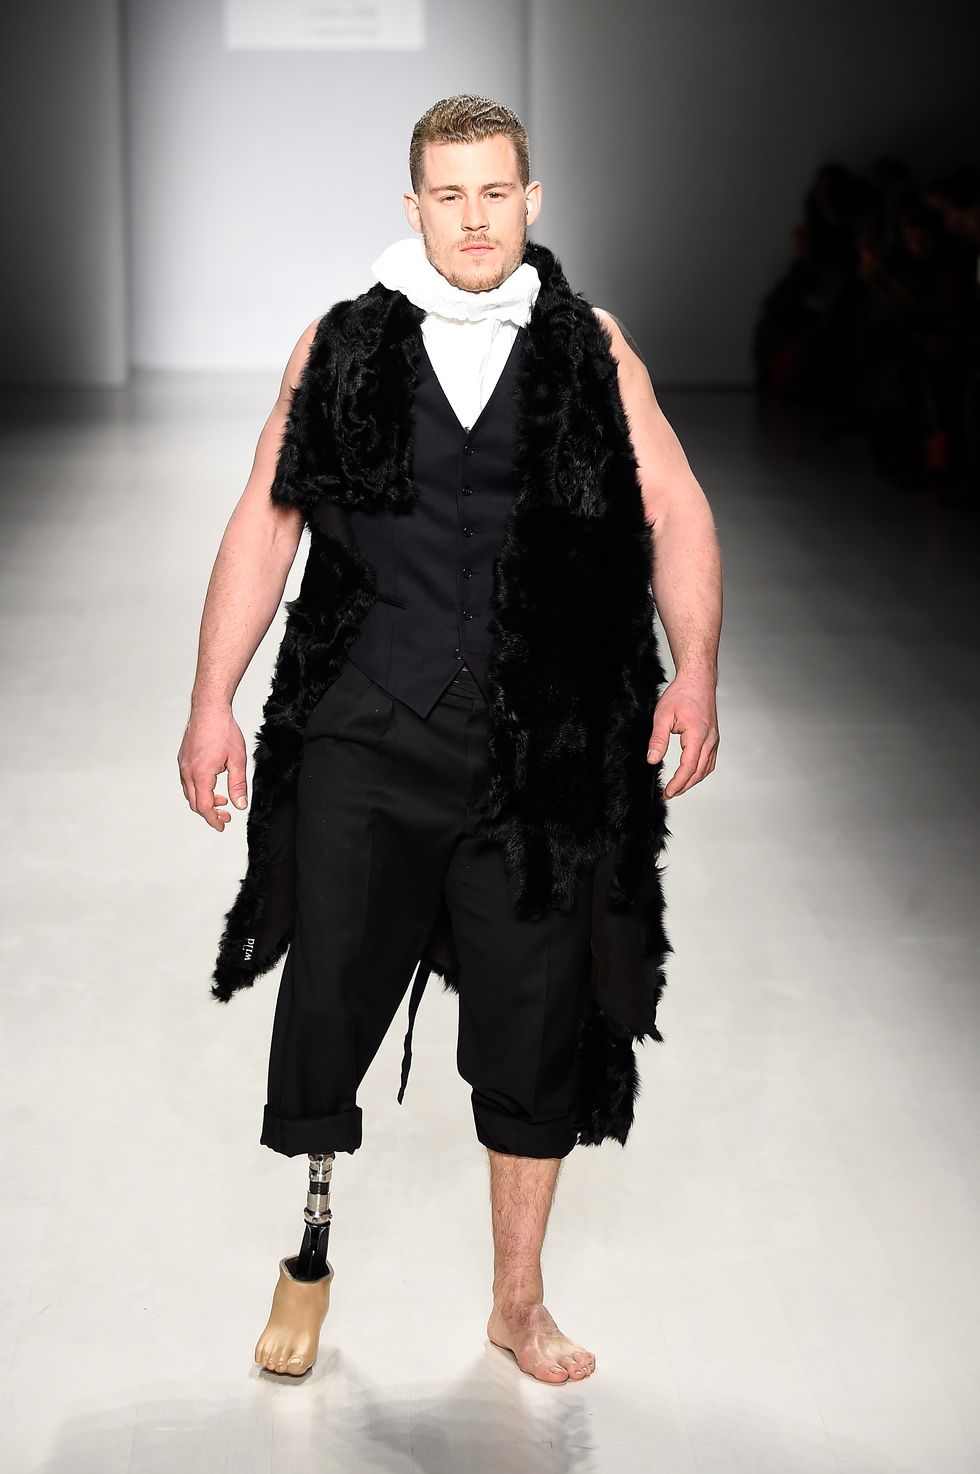 Jack Eyers is the first male model amputee to walk at New York Fashion Week